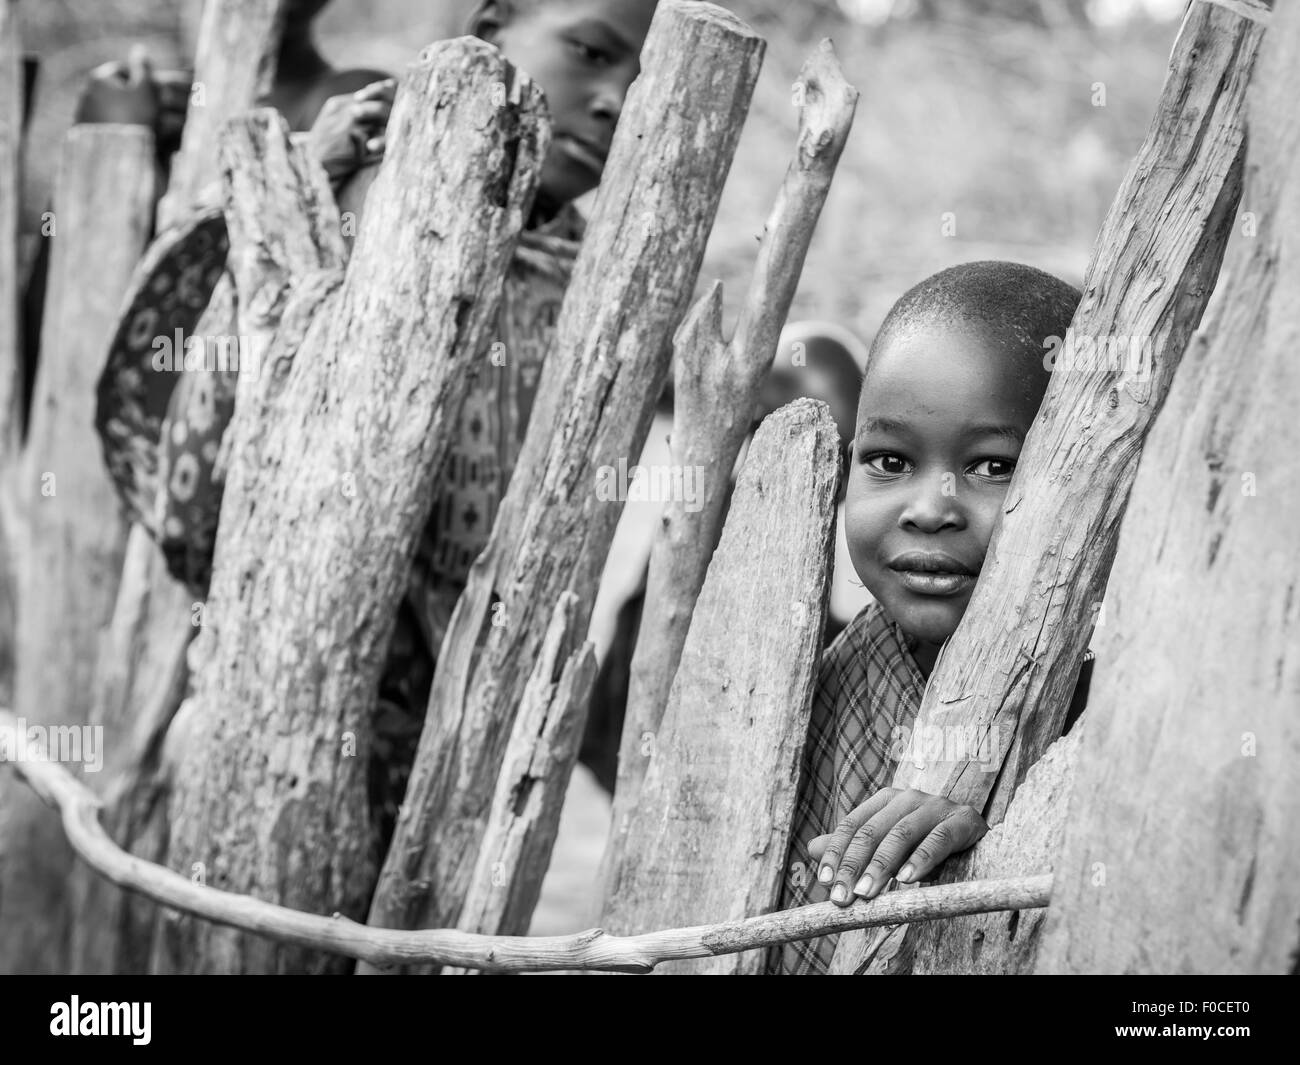 Maasai children next to a wooden goat fence in their boma (village) in Tanzania, Africa. Stock Photo